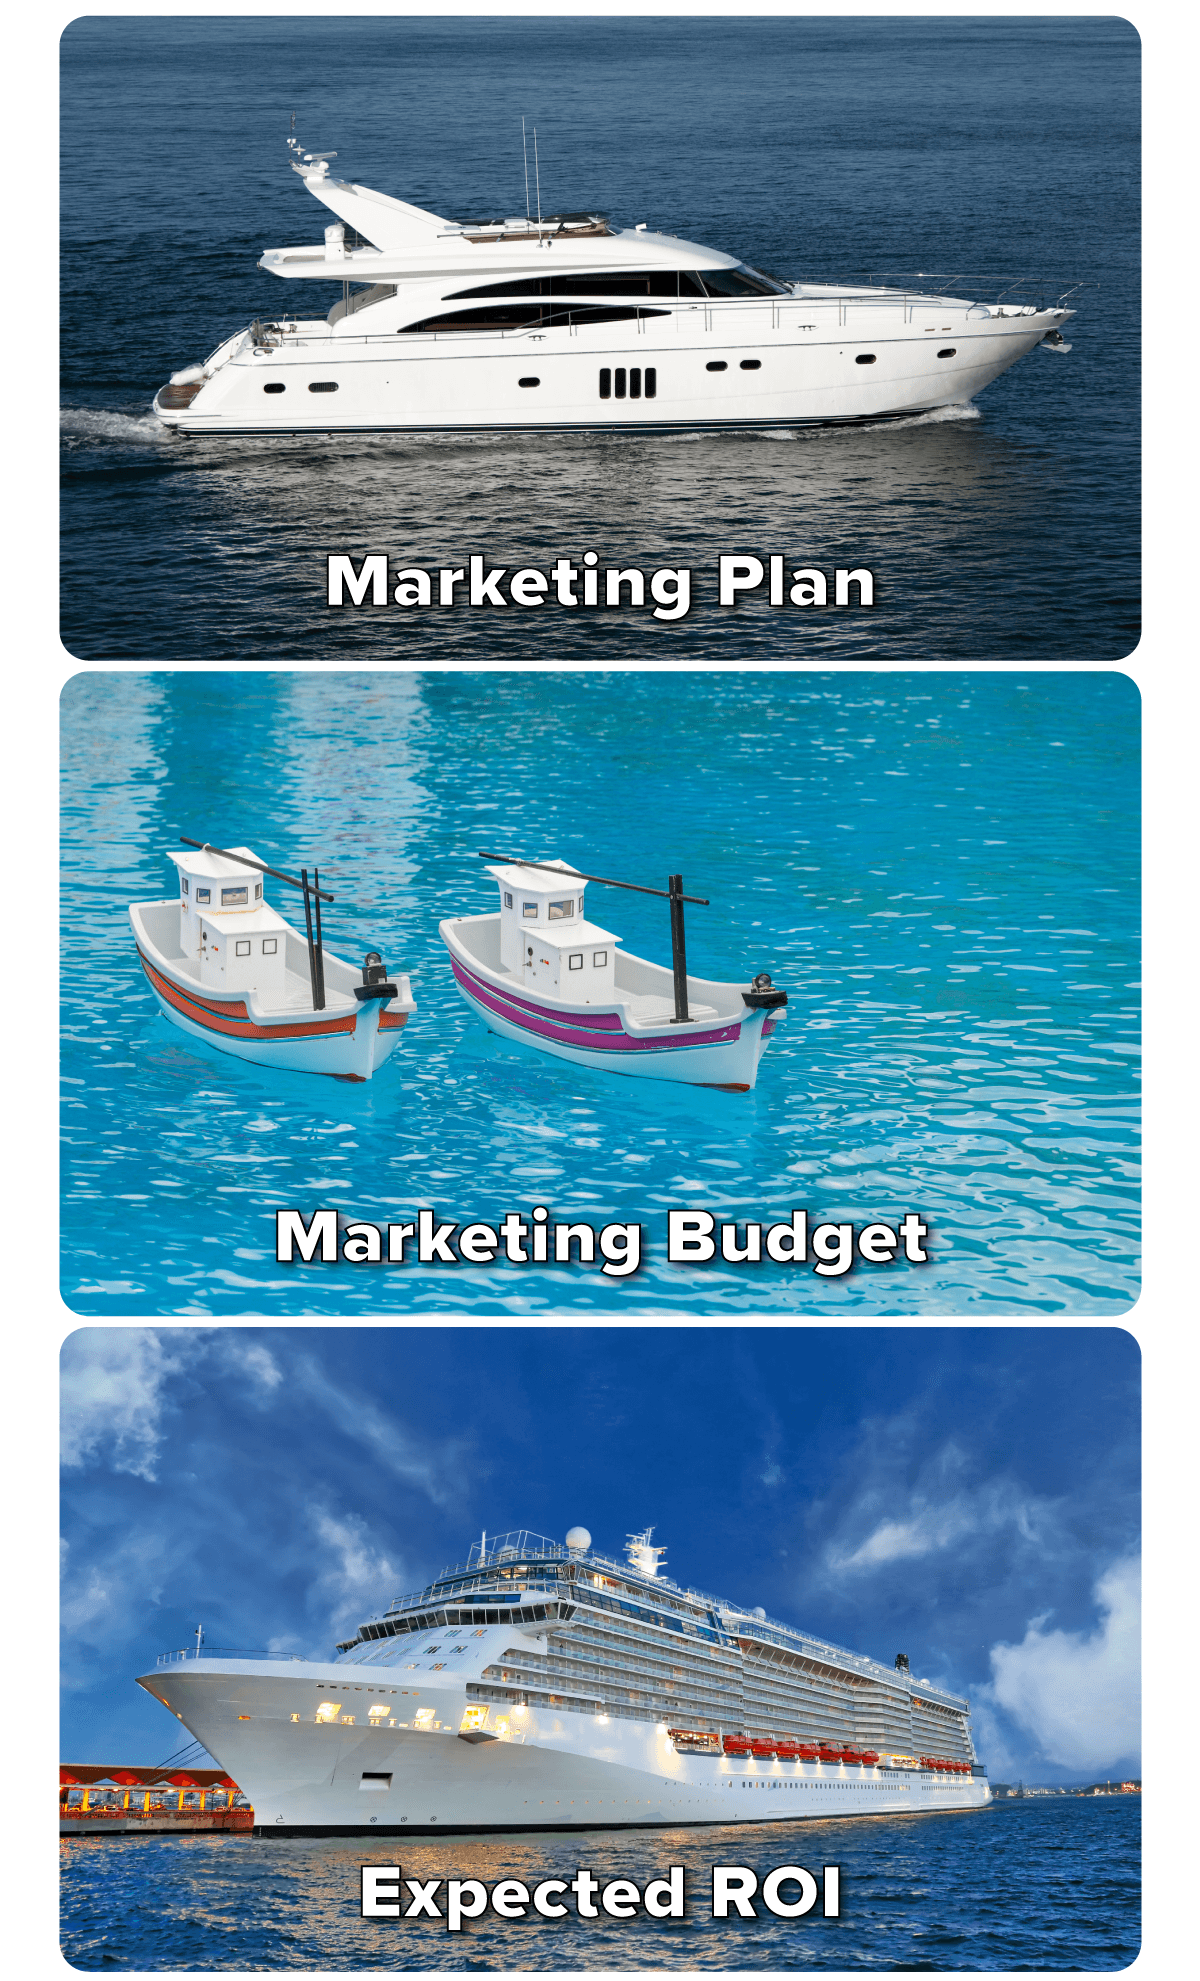 A marketing agency meme comparing the client marketing plan, marketing budget, and expected ROI using Boats